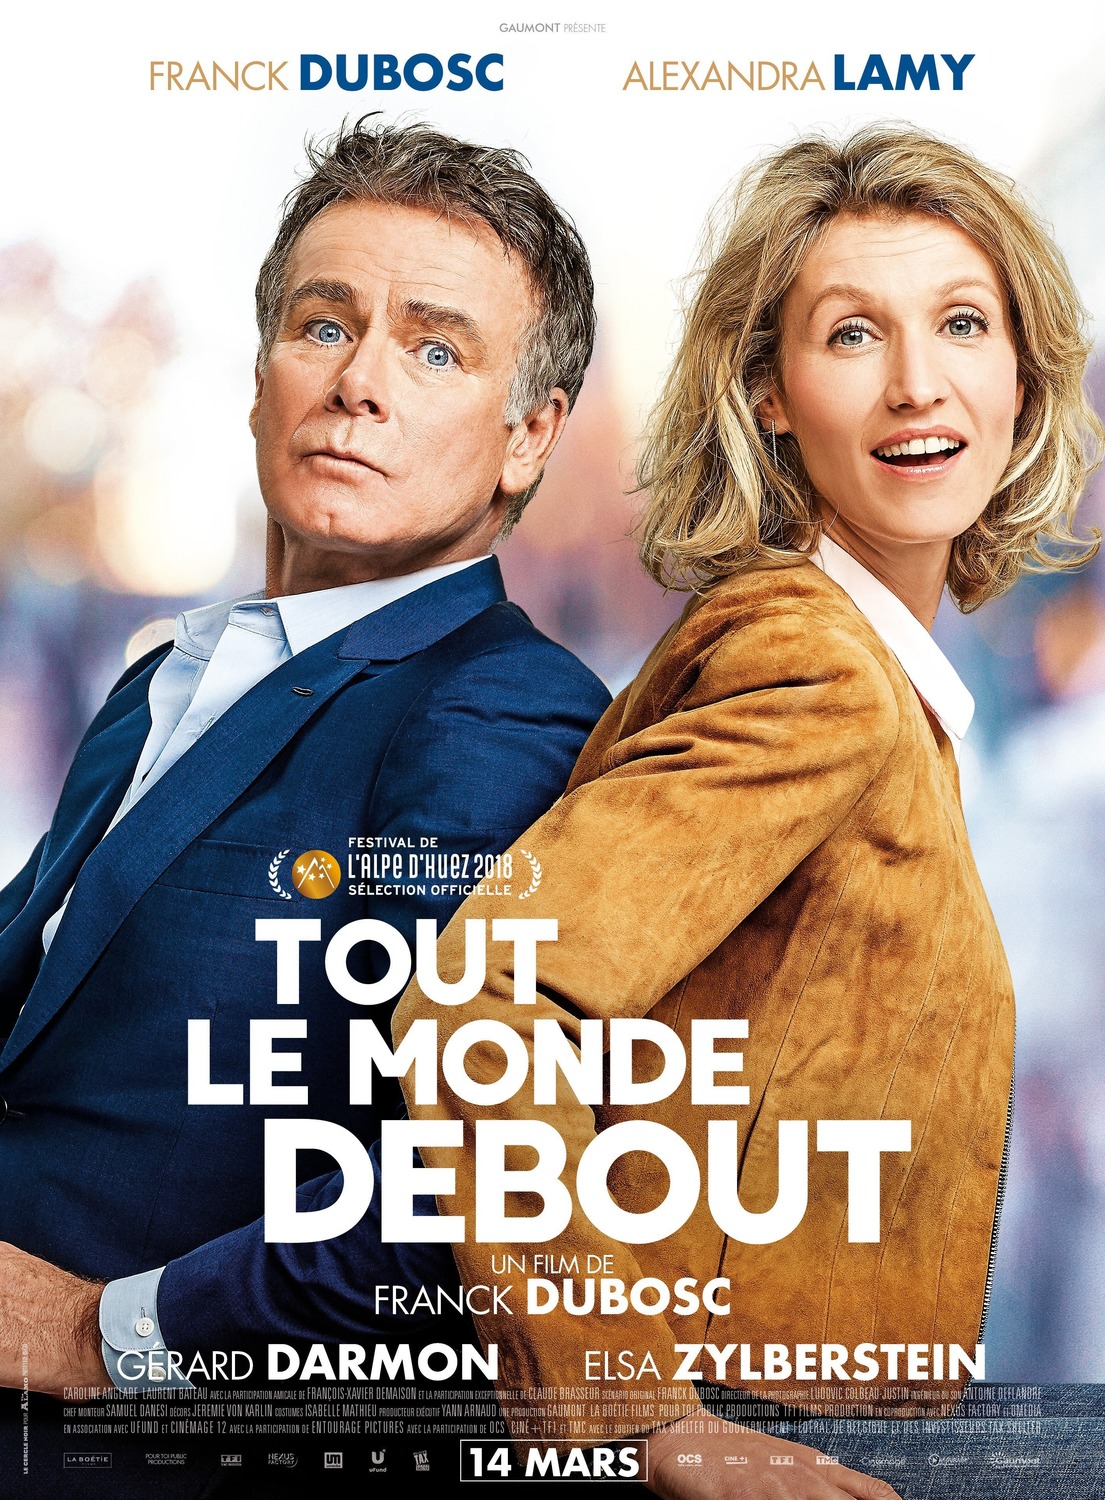 Extra Large Movie Poster Image for Tout le monde debout 